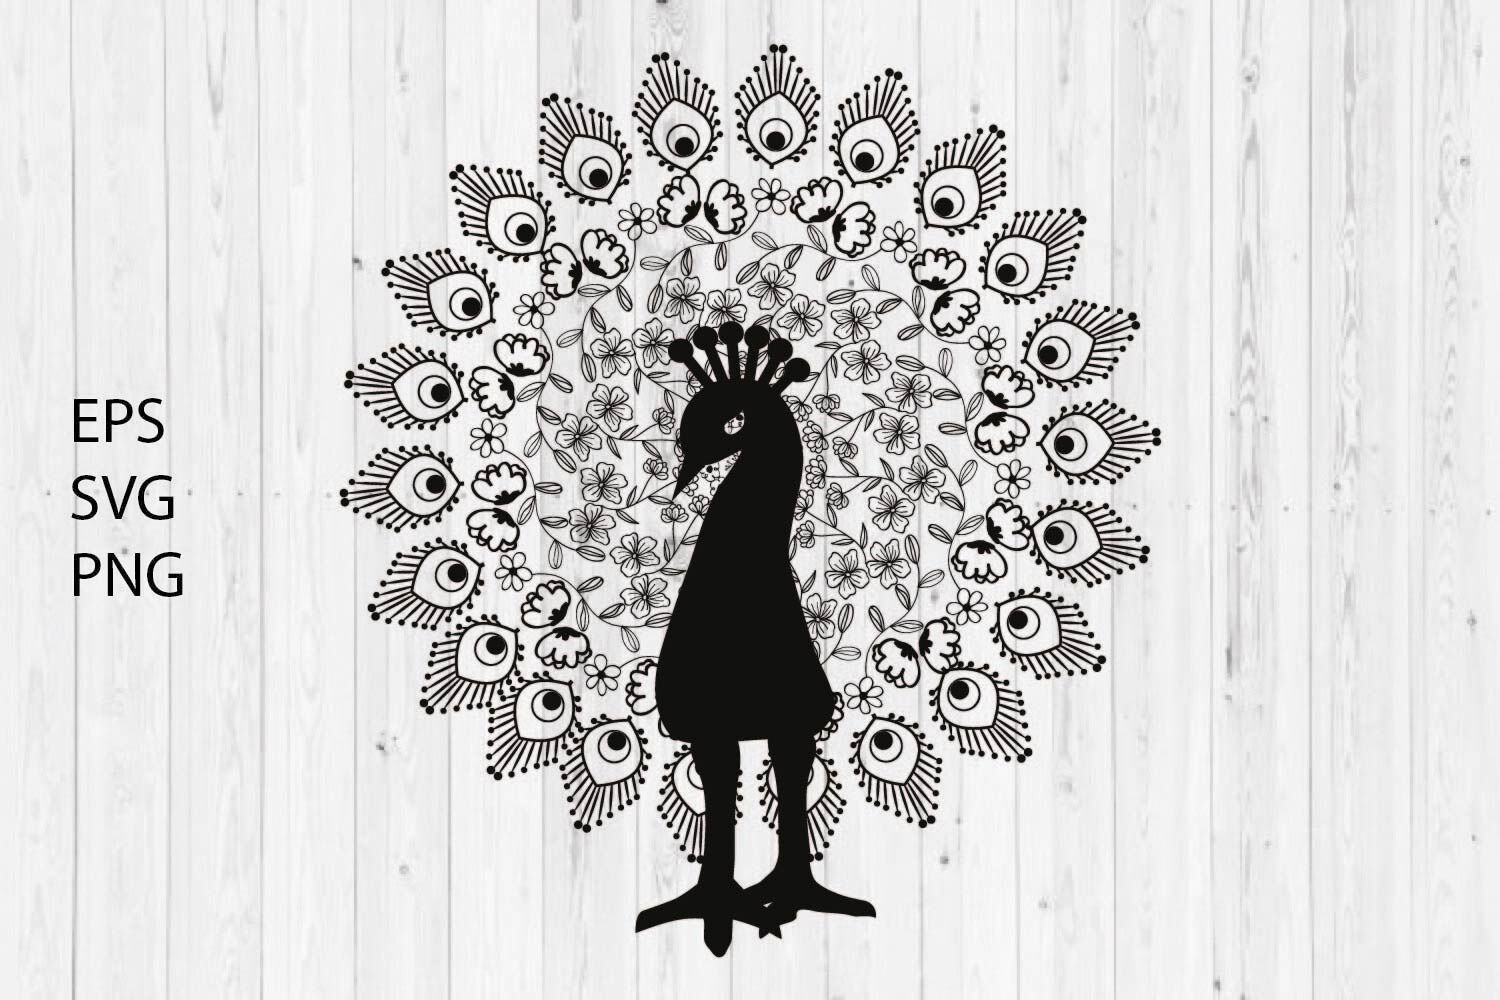 Download Peacock Feather Mandala Zentangle Peacock Feather Svgs By Paper Switch Thehungryjpeg Com